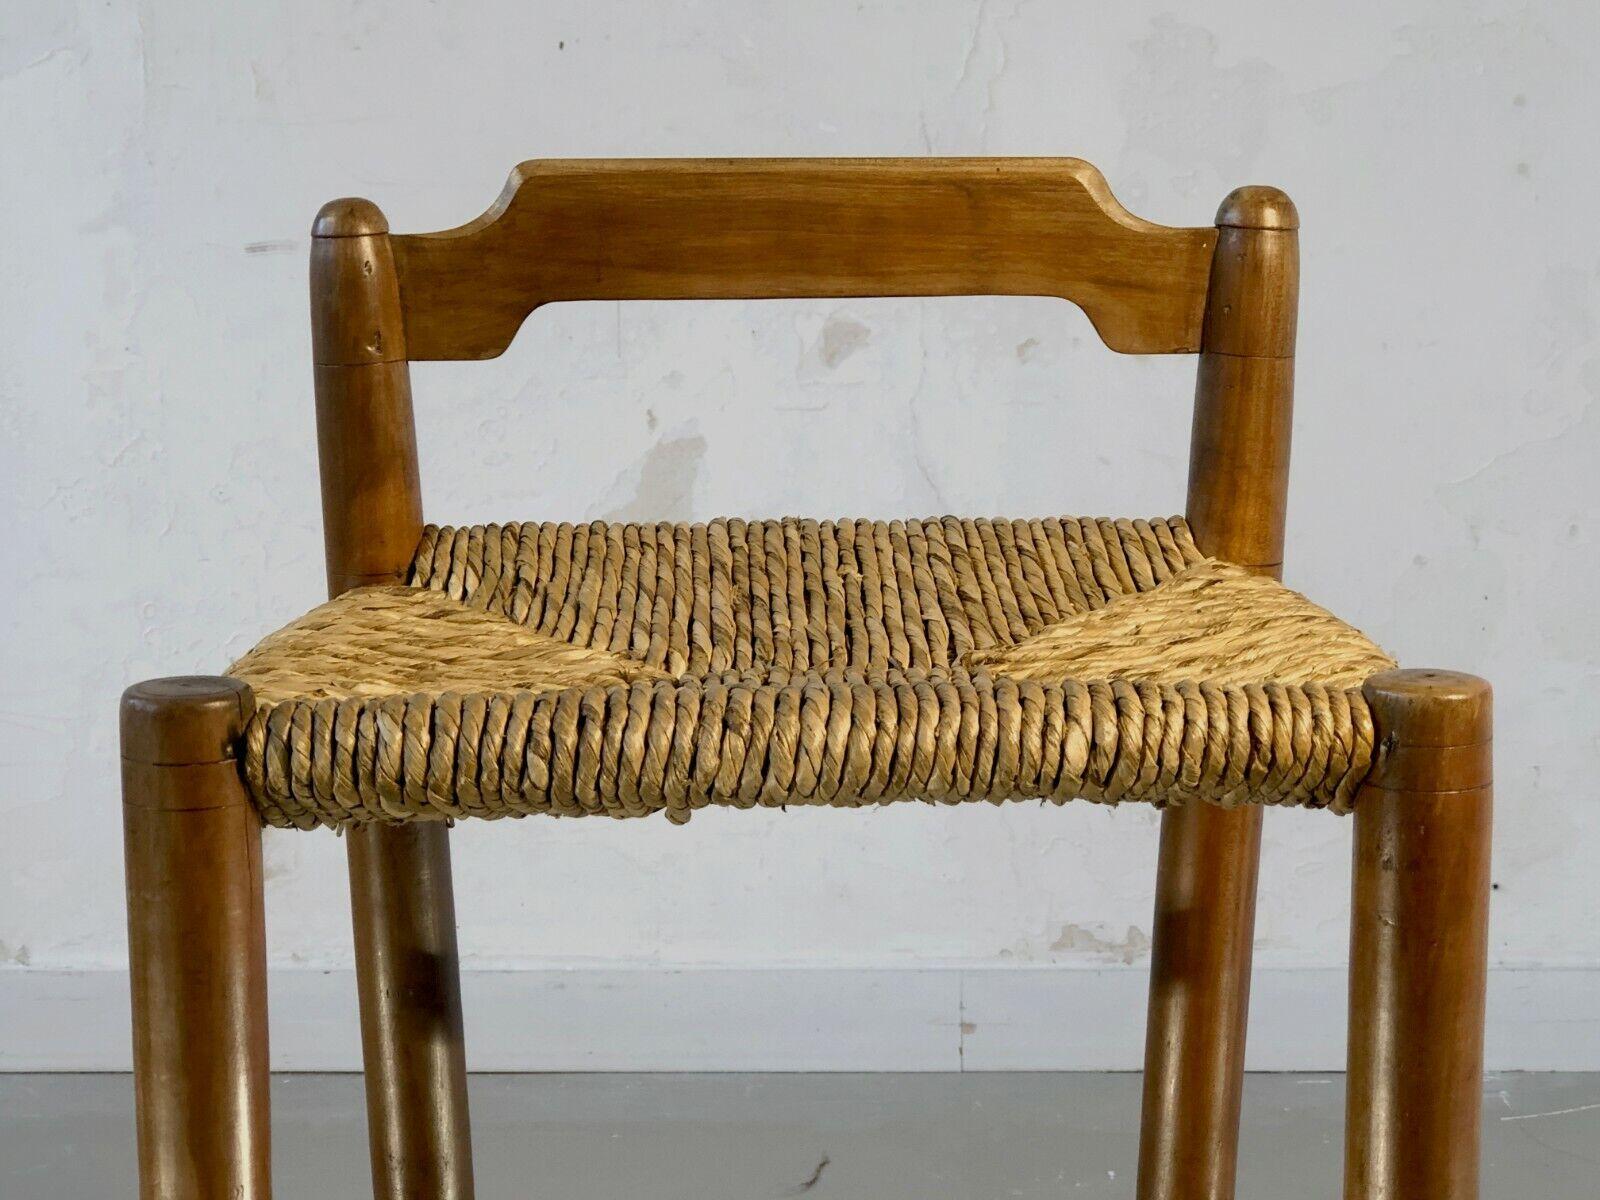 A BRUTALIST MID-CENTURY-MODERN RUSTIC BAR STOOL CHAIR, France 1950 For Sale 6